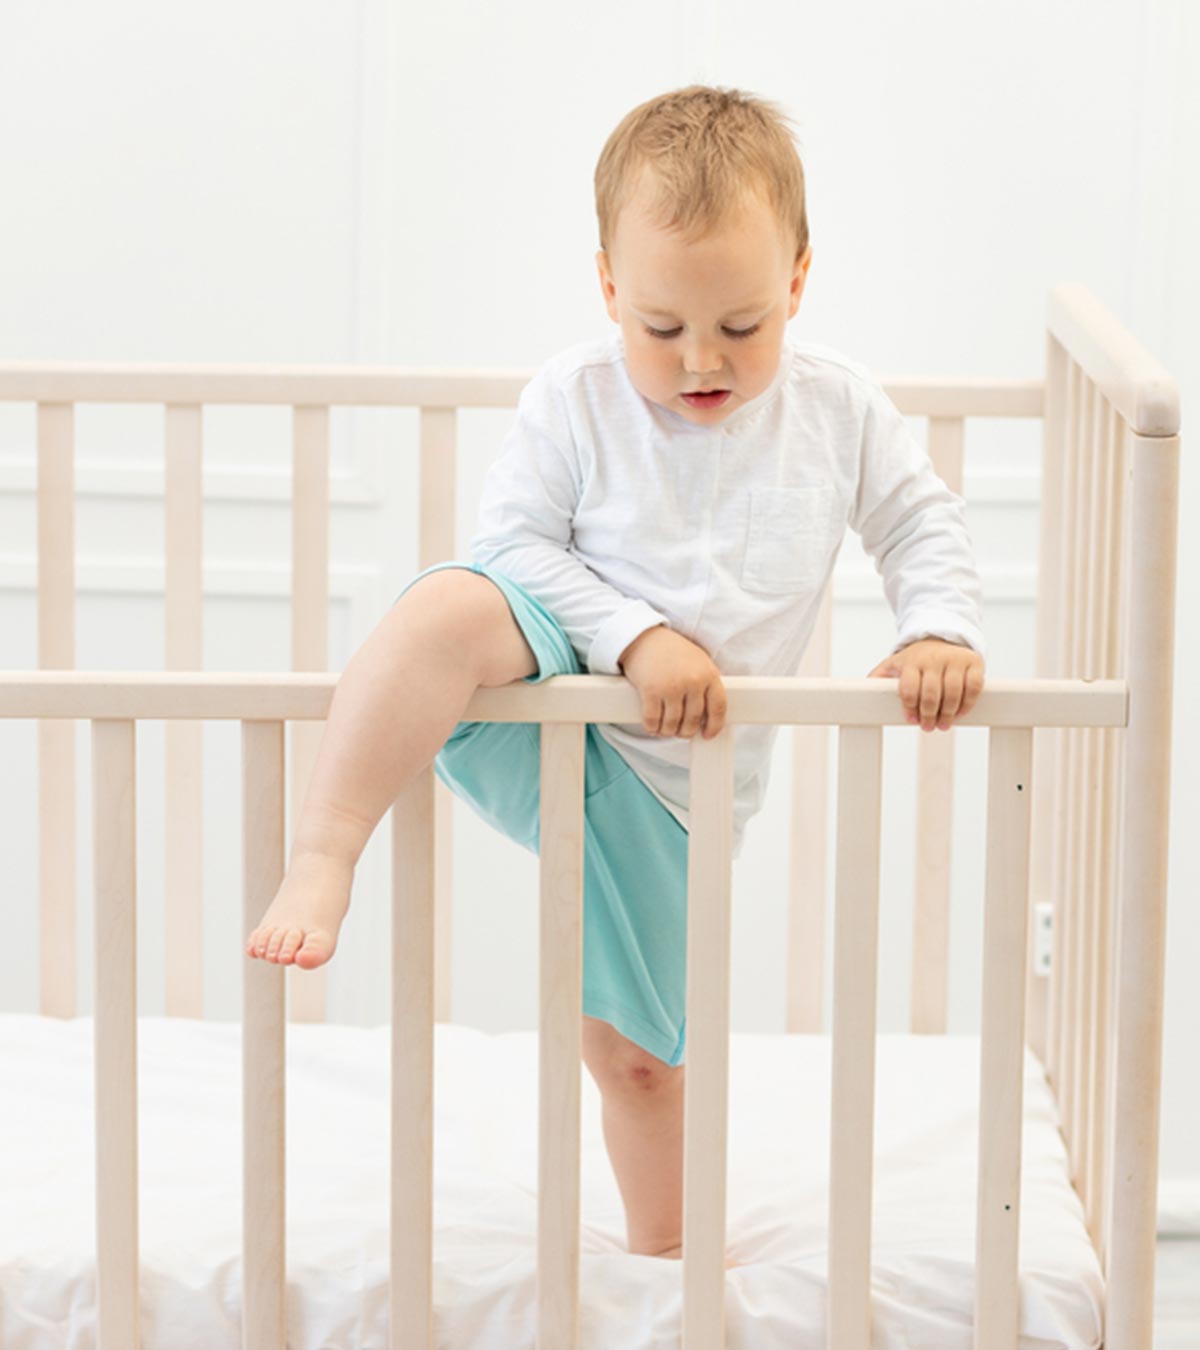 5 Effective Tips To Prevent Toddler Climbing Out Of Crib